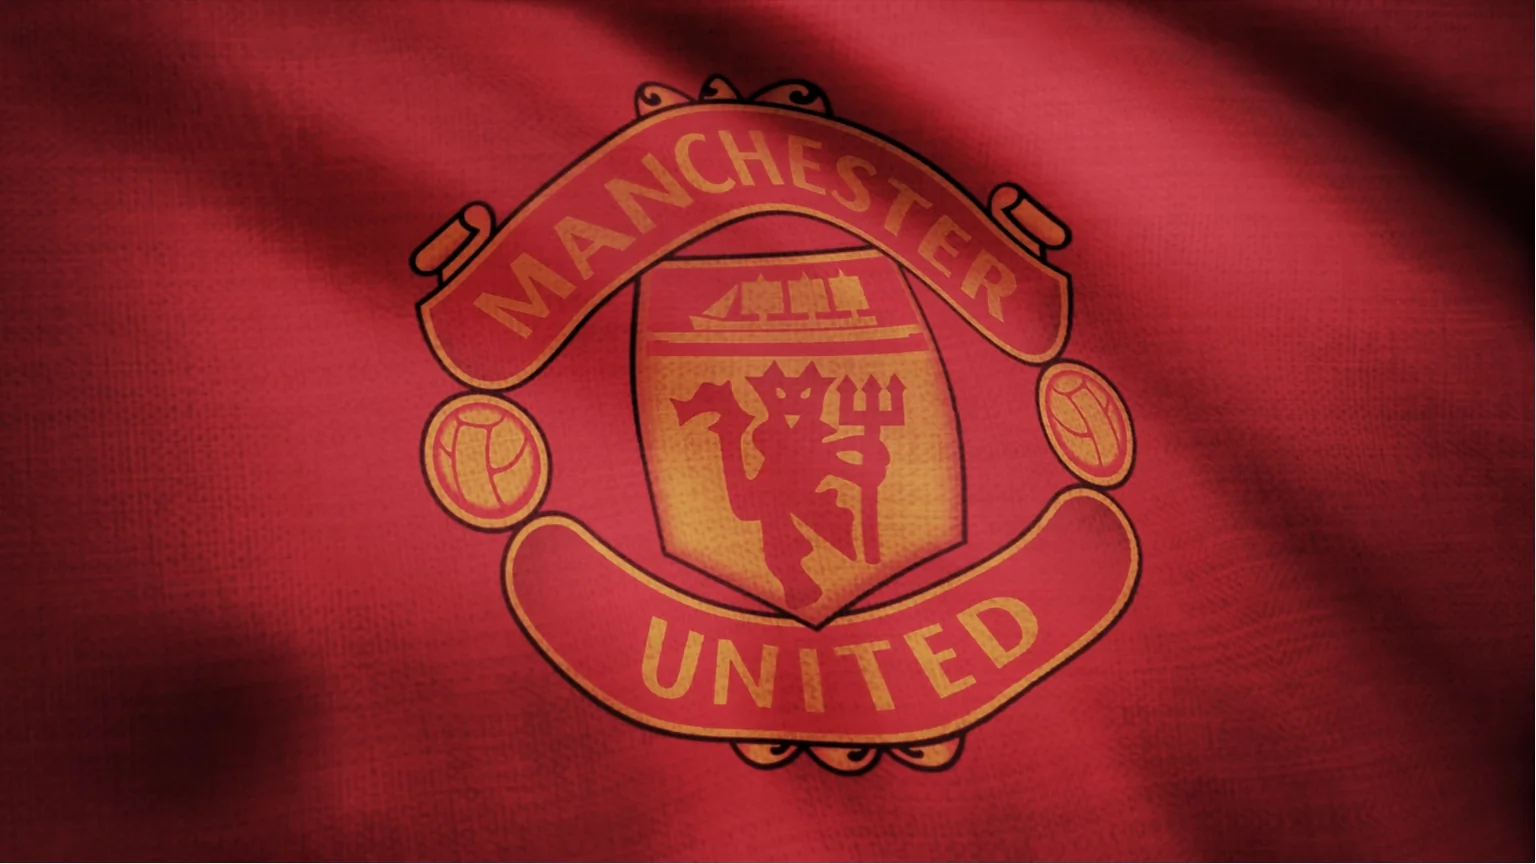 Manchester United is a soccer team in England. Image: Shutterstock